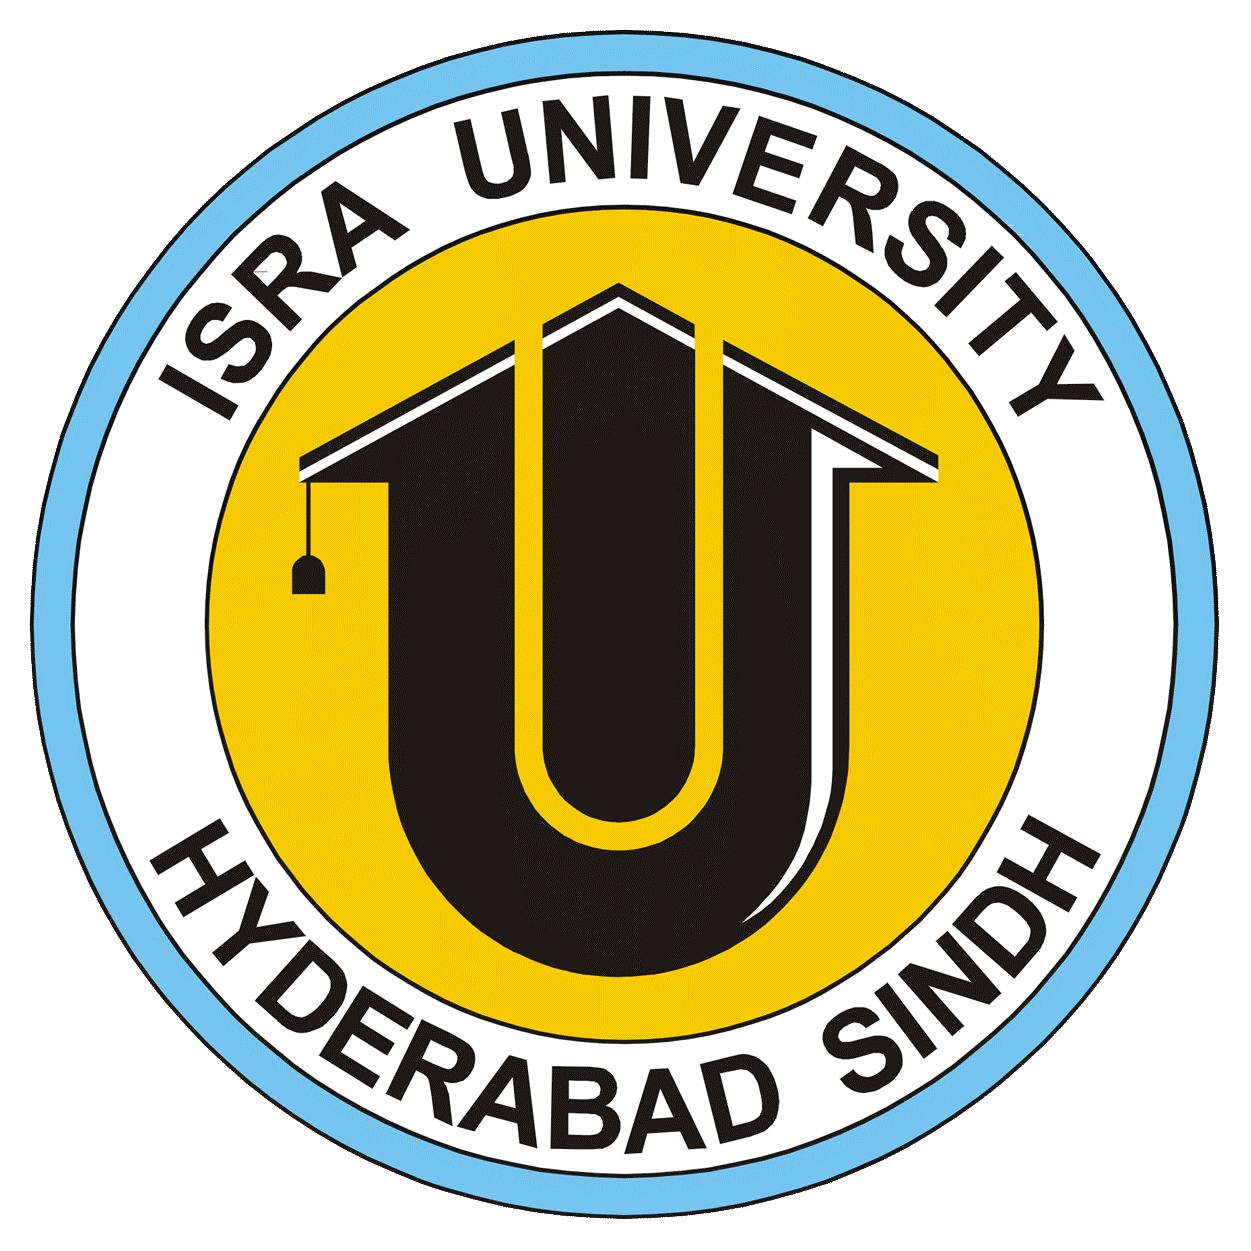 Isra University Admission Courses, Requirements, Fee Structure, Contact Info